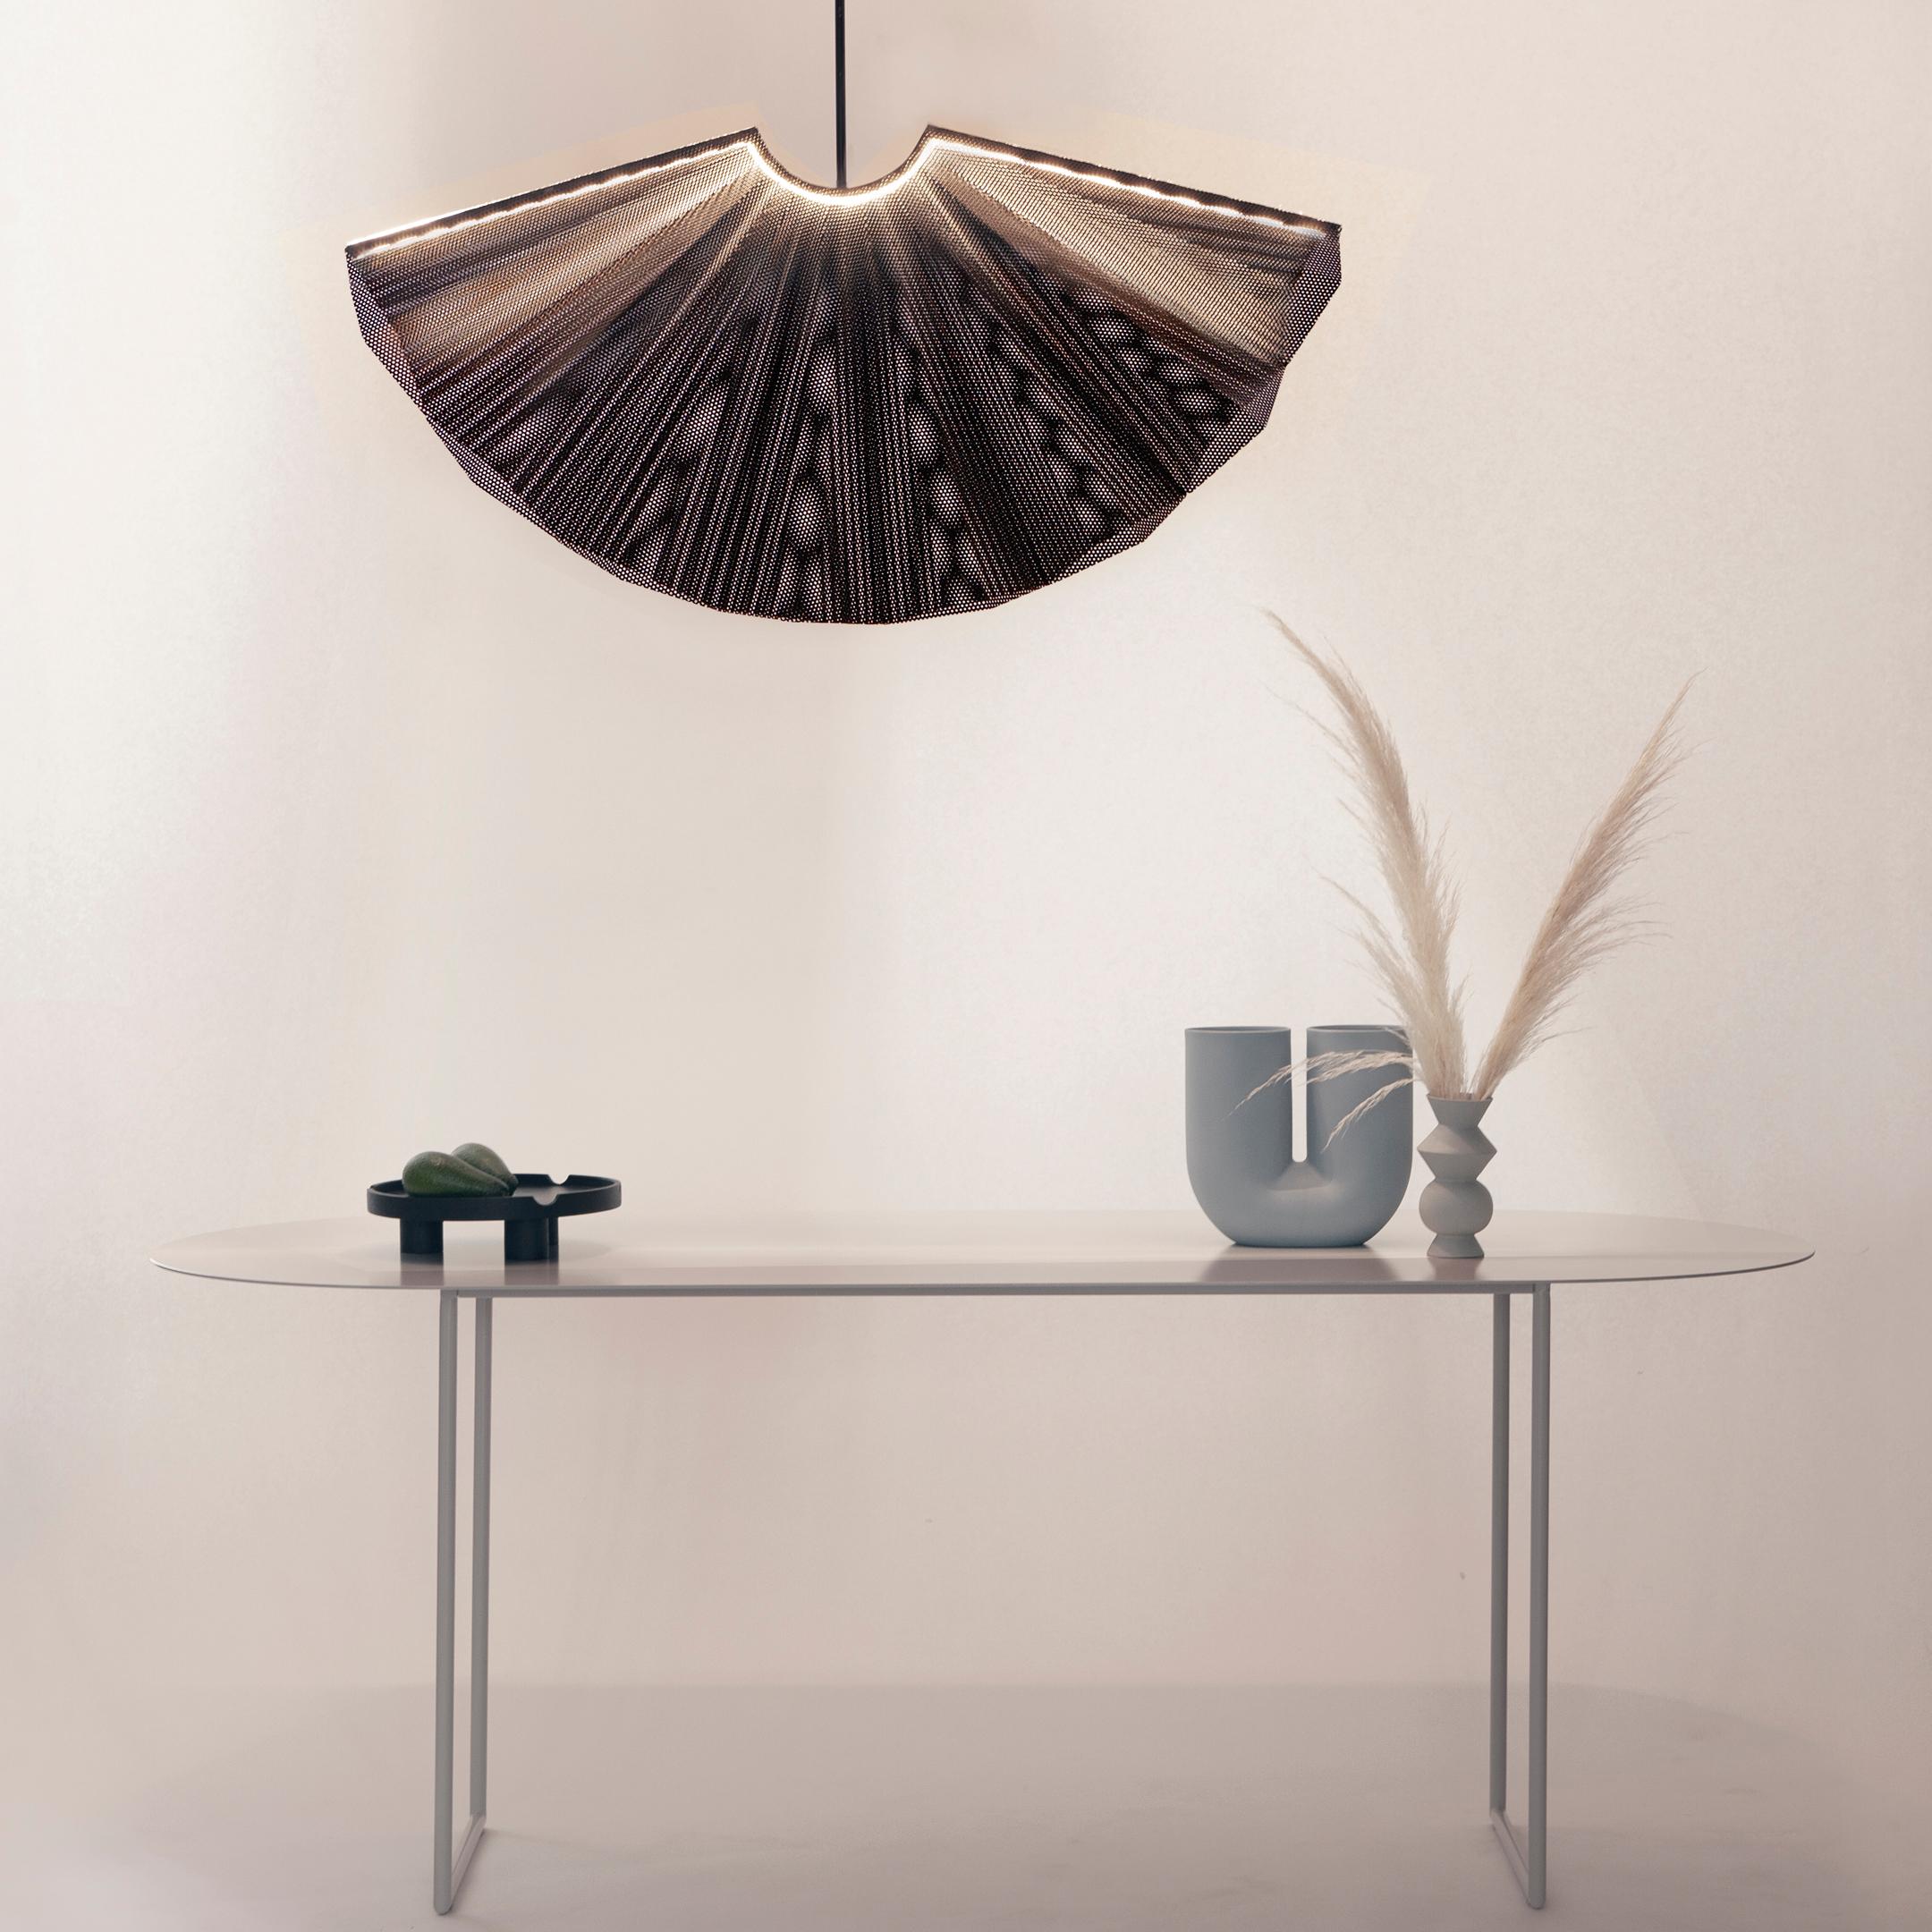 SHINE is a limited edition living room & studio table that is part of the CELESTINE collection by jacobsroom studio, Rome.
Shine is inspired by Italian writer Italo Calvino’s short story “t zero”, in which he attempts to “look at time in the same